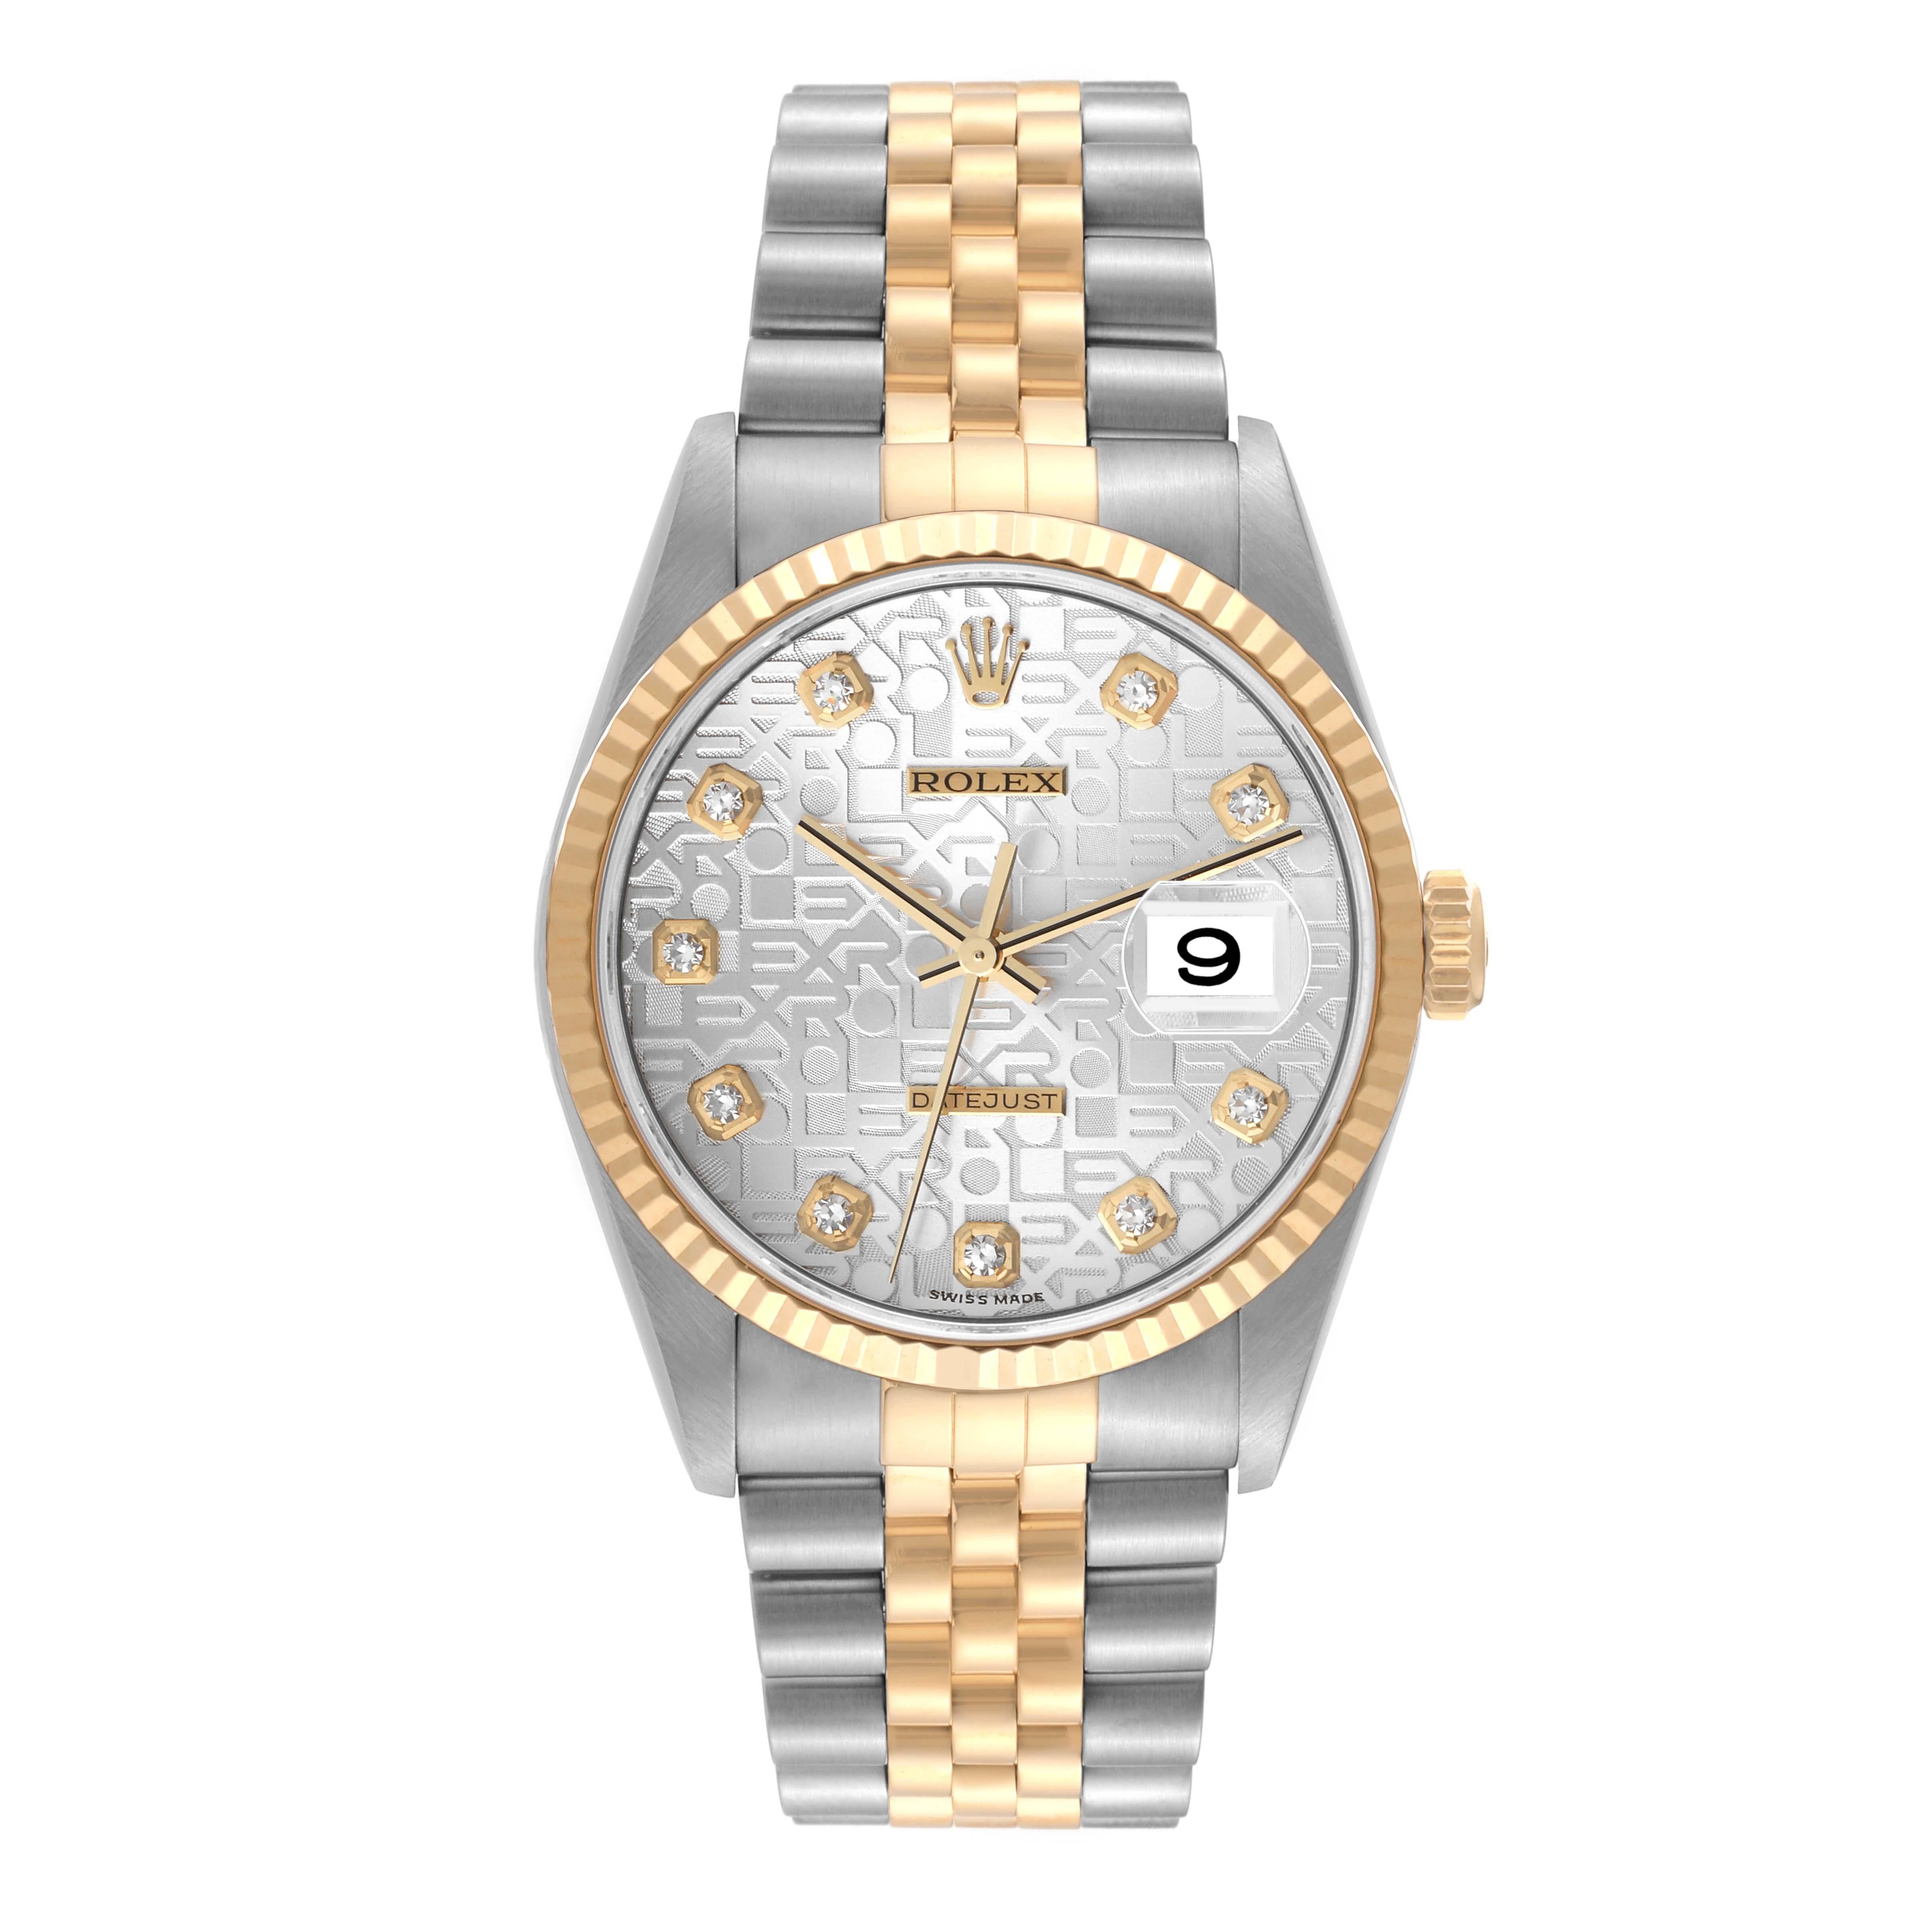 Rolex Datejust Anniversary Diamond Dial Steel Yellow Gold Mens Watch 16233 For Sale 7